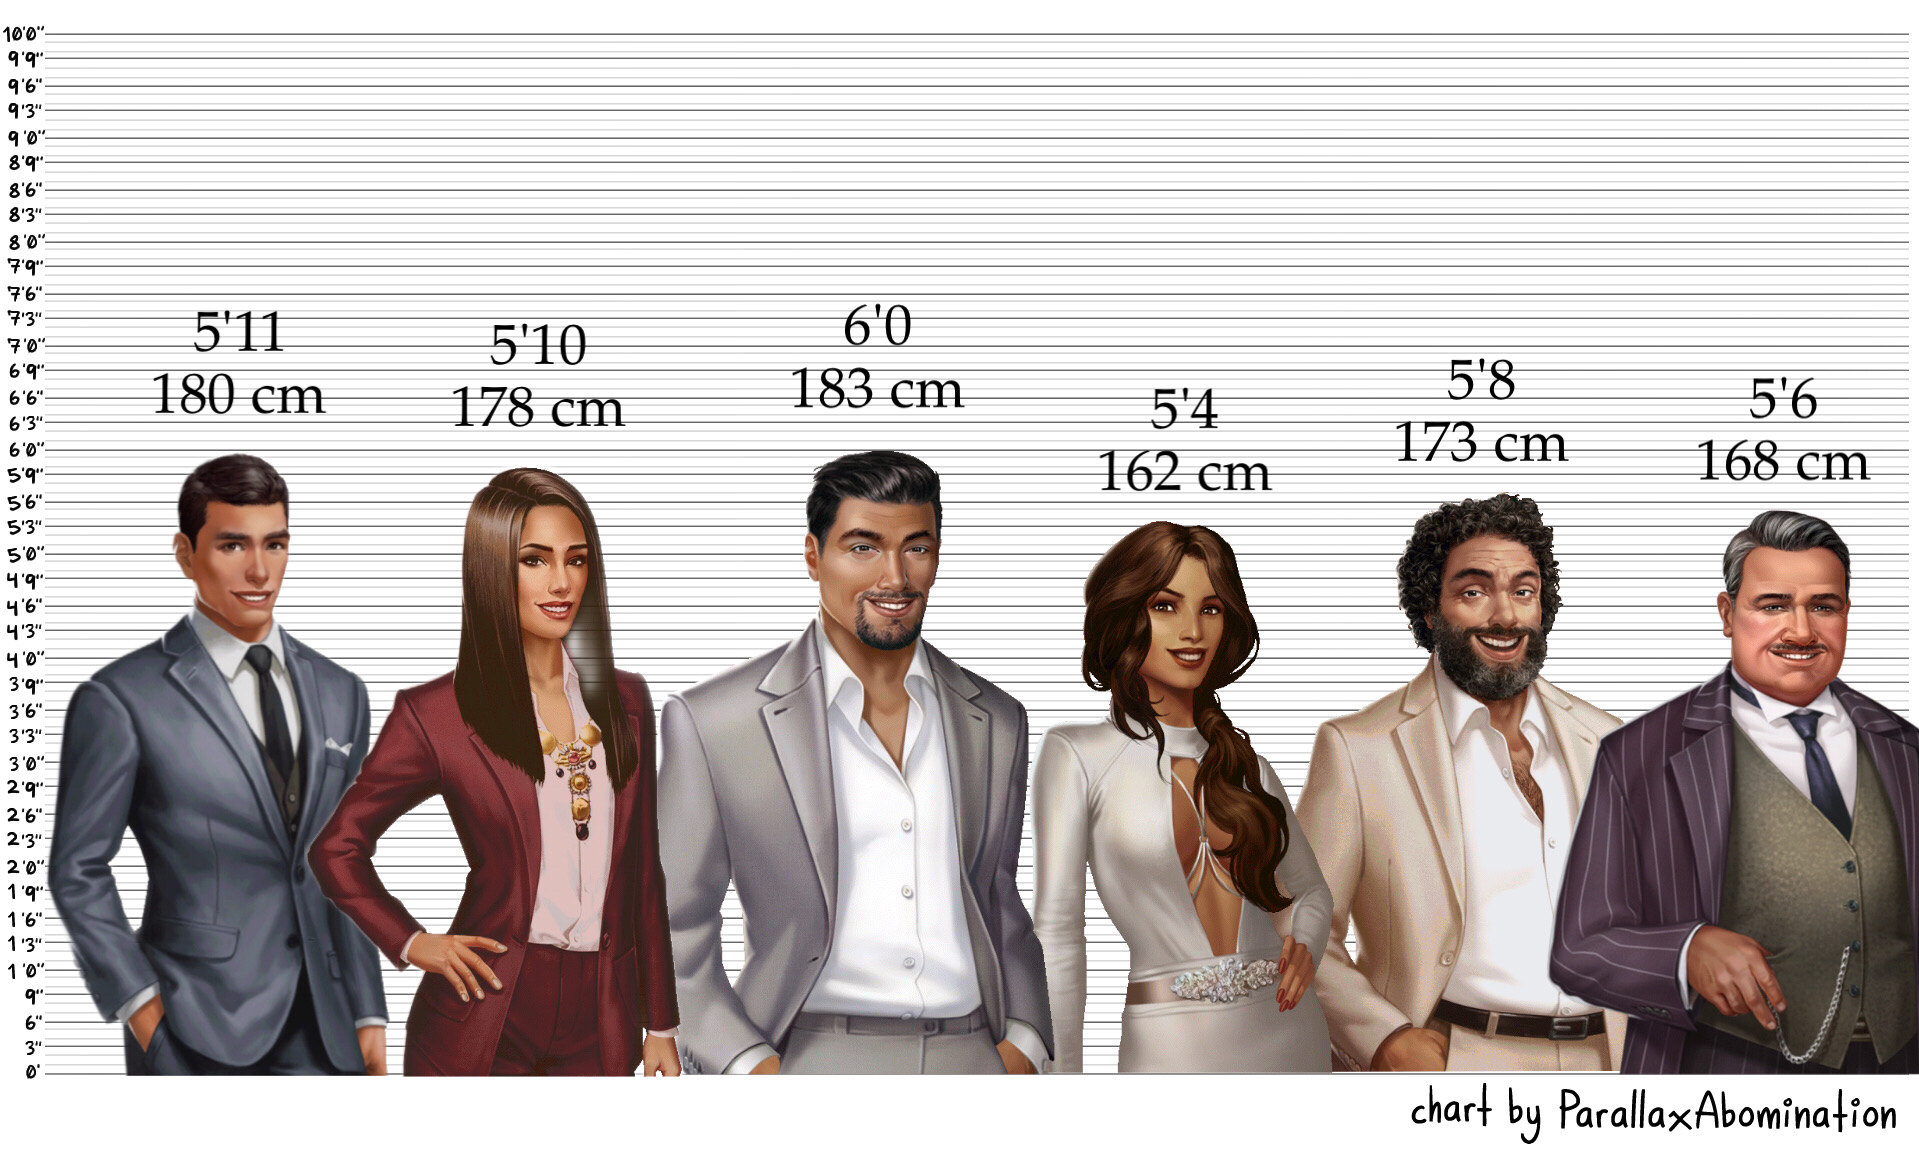 What are the average heights for men, and how does 178 cm compare